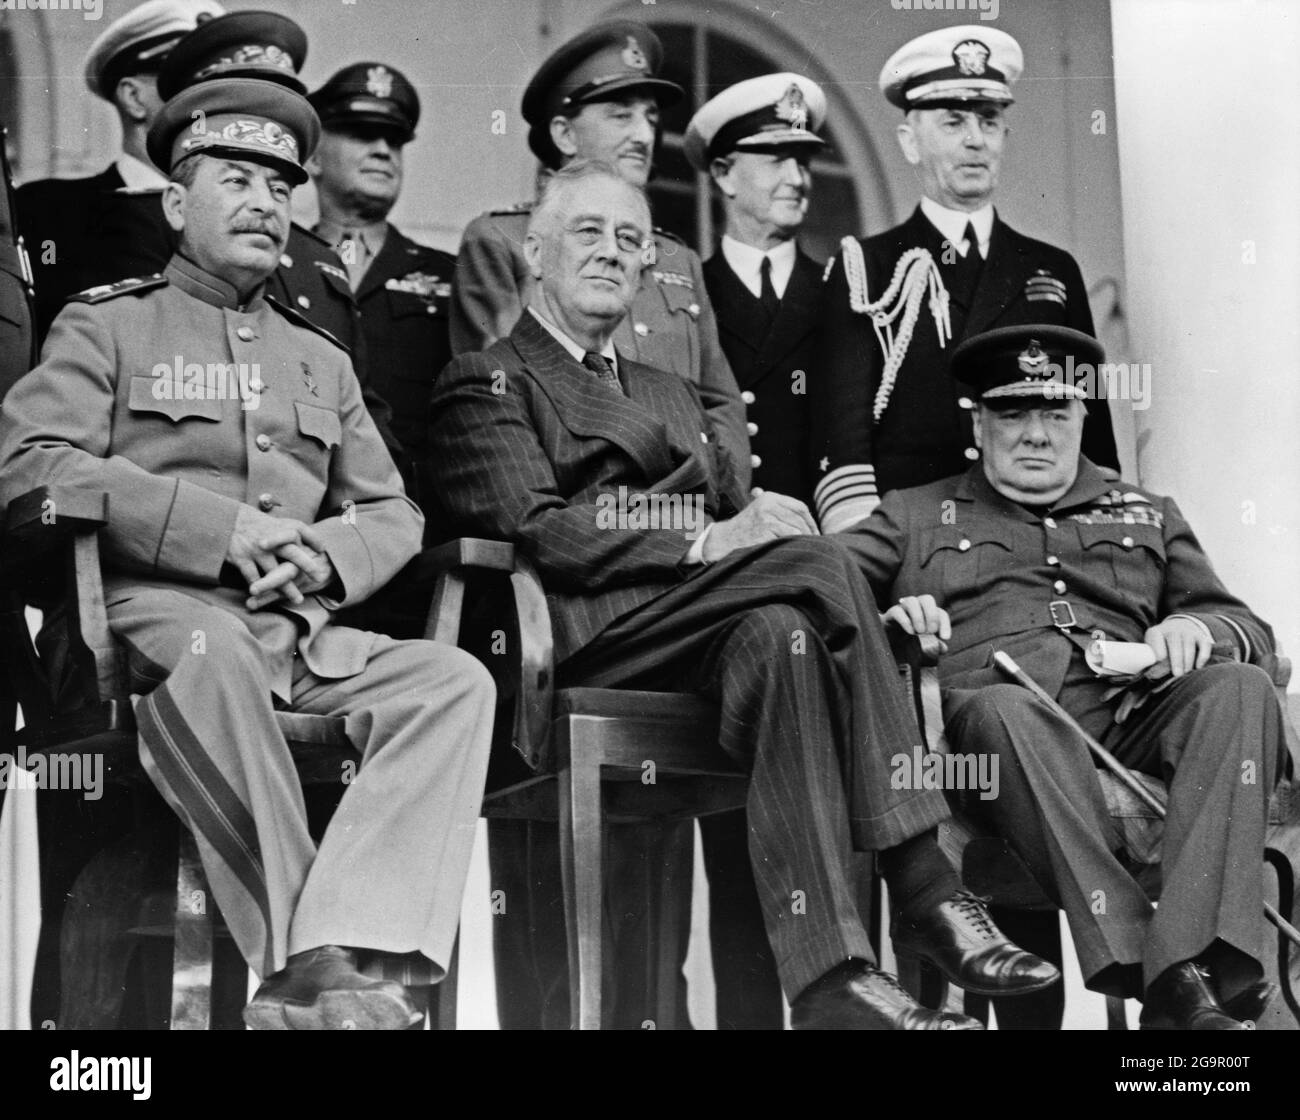 TEHRAN, IRAN - 28 November - 01 Dec.ember 1943 - Group portrait of the 'Big Three' (Stalin, Roosevelt and Churchill) at the 1943 Tehran Conference. Fr Stock Photo